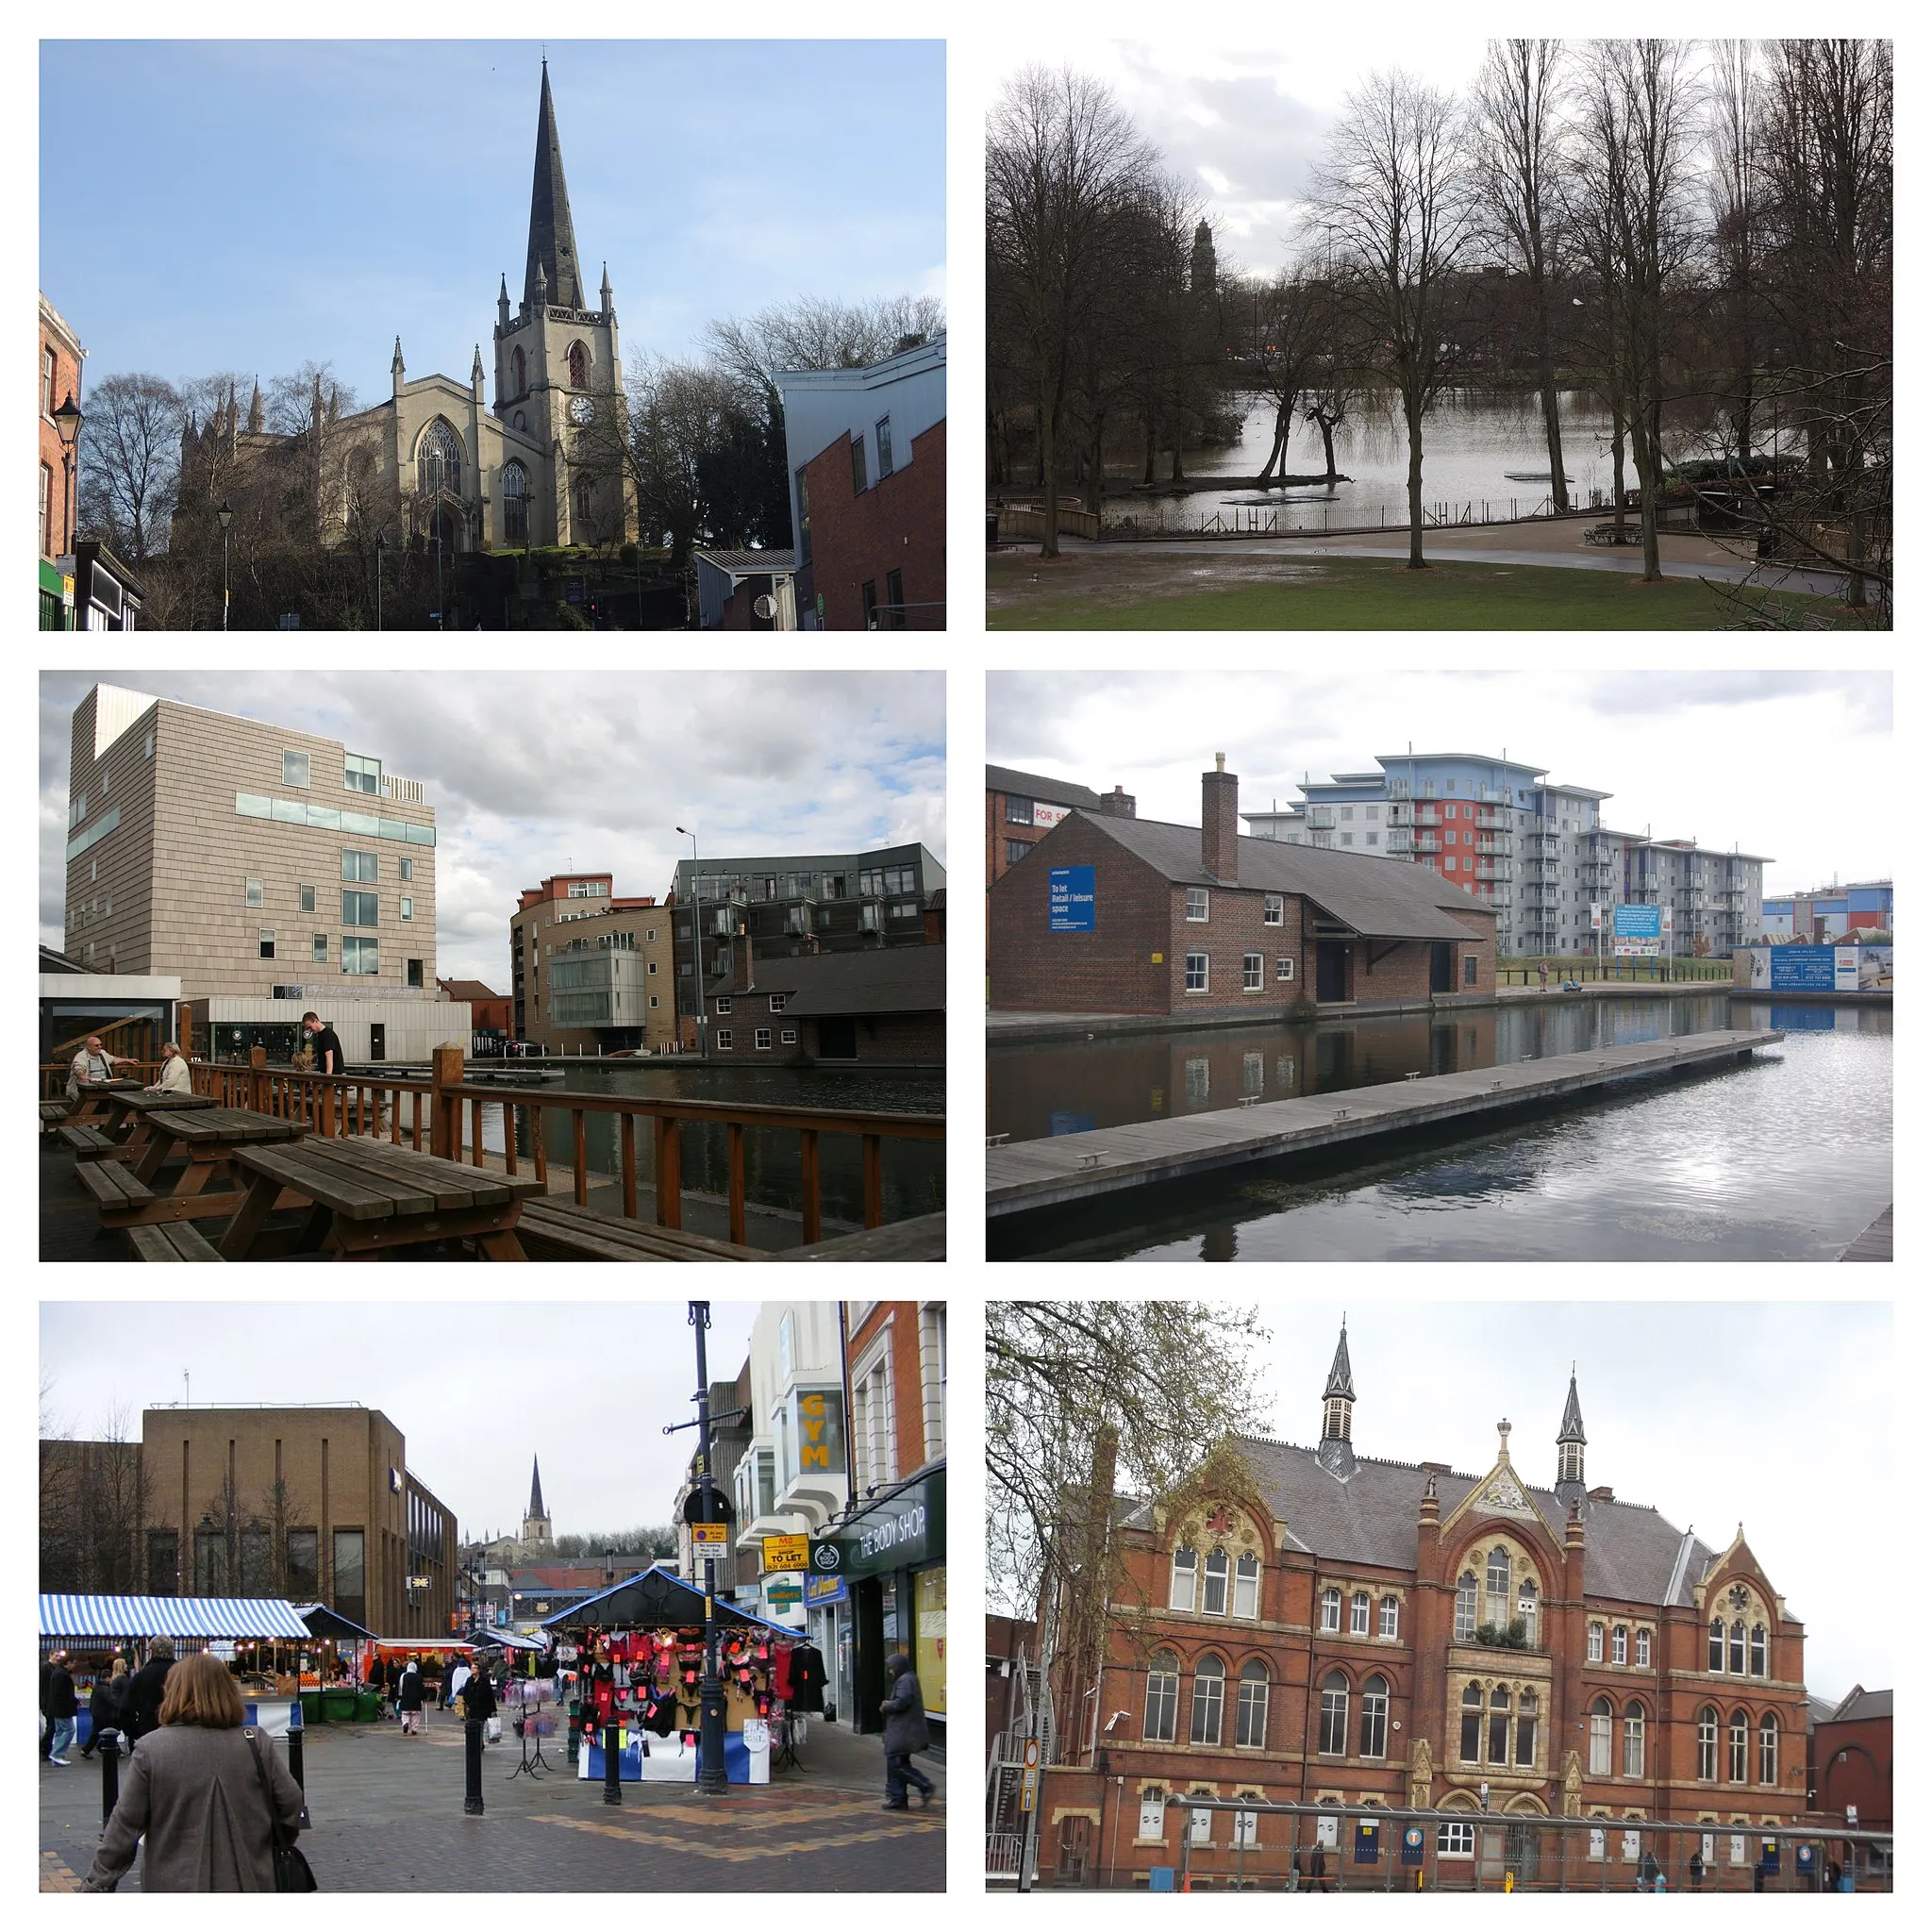 Photo showing: Clockwise from top left: St Matthew's Church, Walsall Arboretum, Walsall Canal Basin, former Institute of Science and Art, Saturday market in Walsall town centre, The New  Art Gallery Walsall from canal wharf